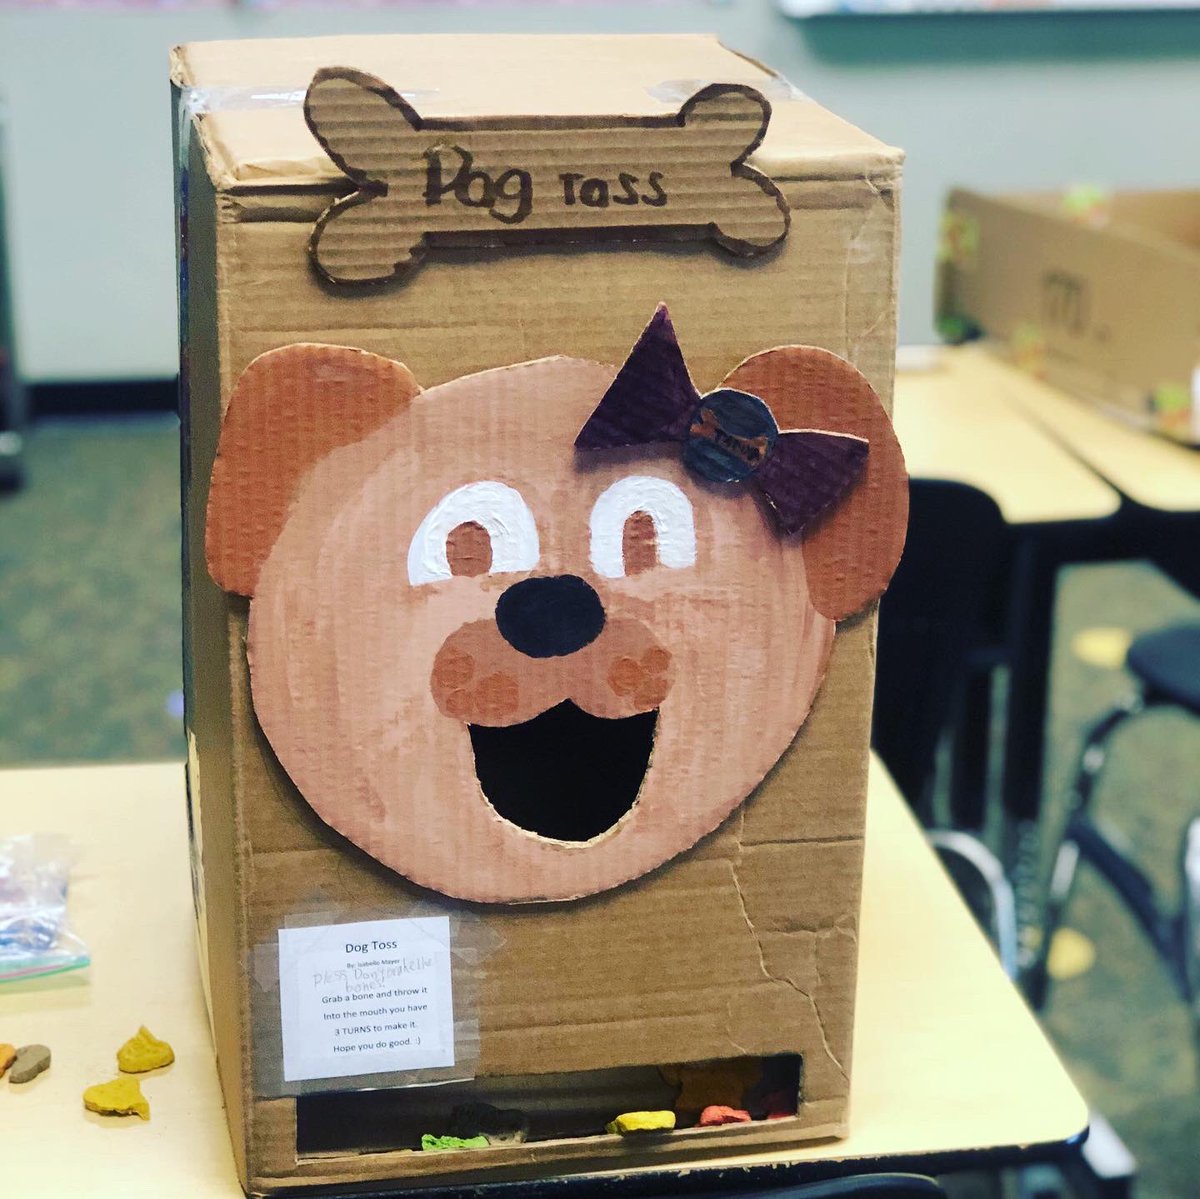 Celebrated amazing #creativity during today’s 2nd Annual Cardboard Challenge! #DayofPlay